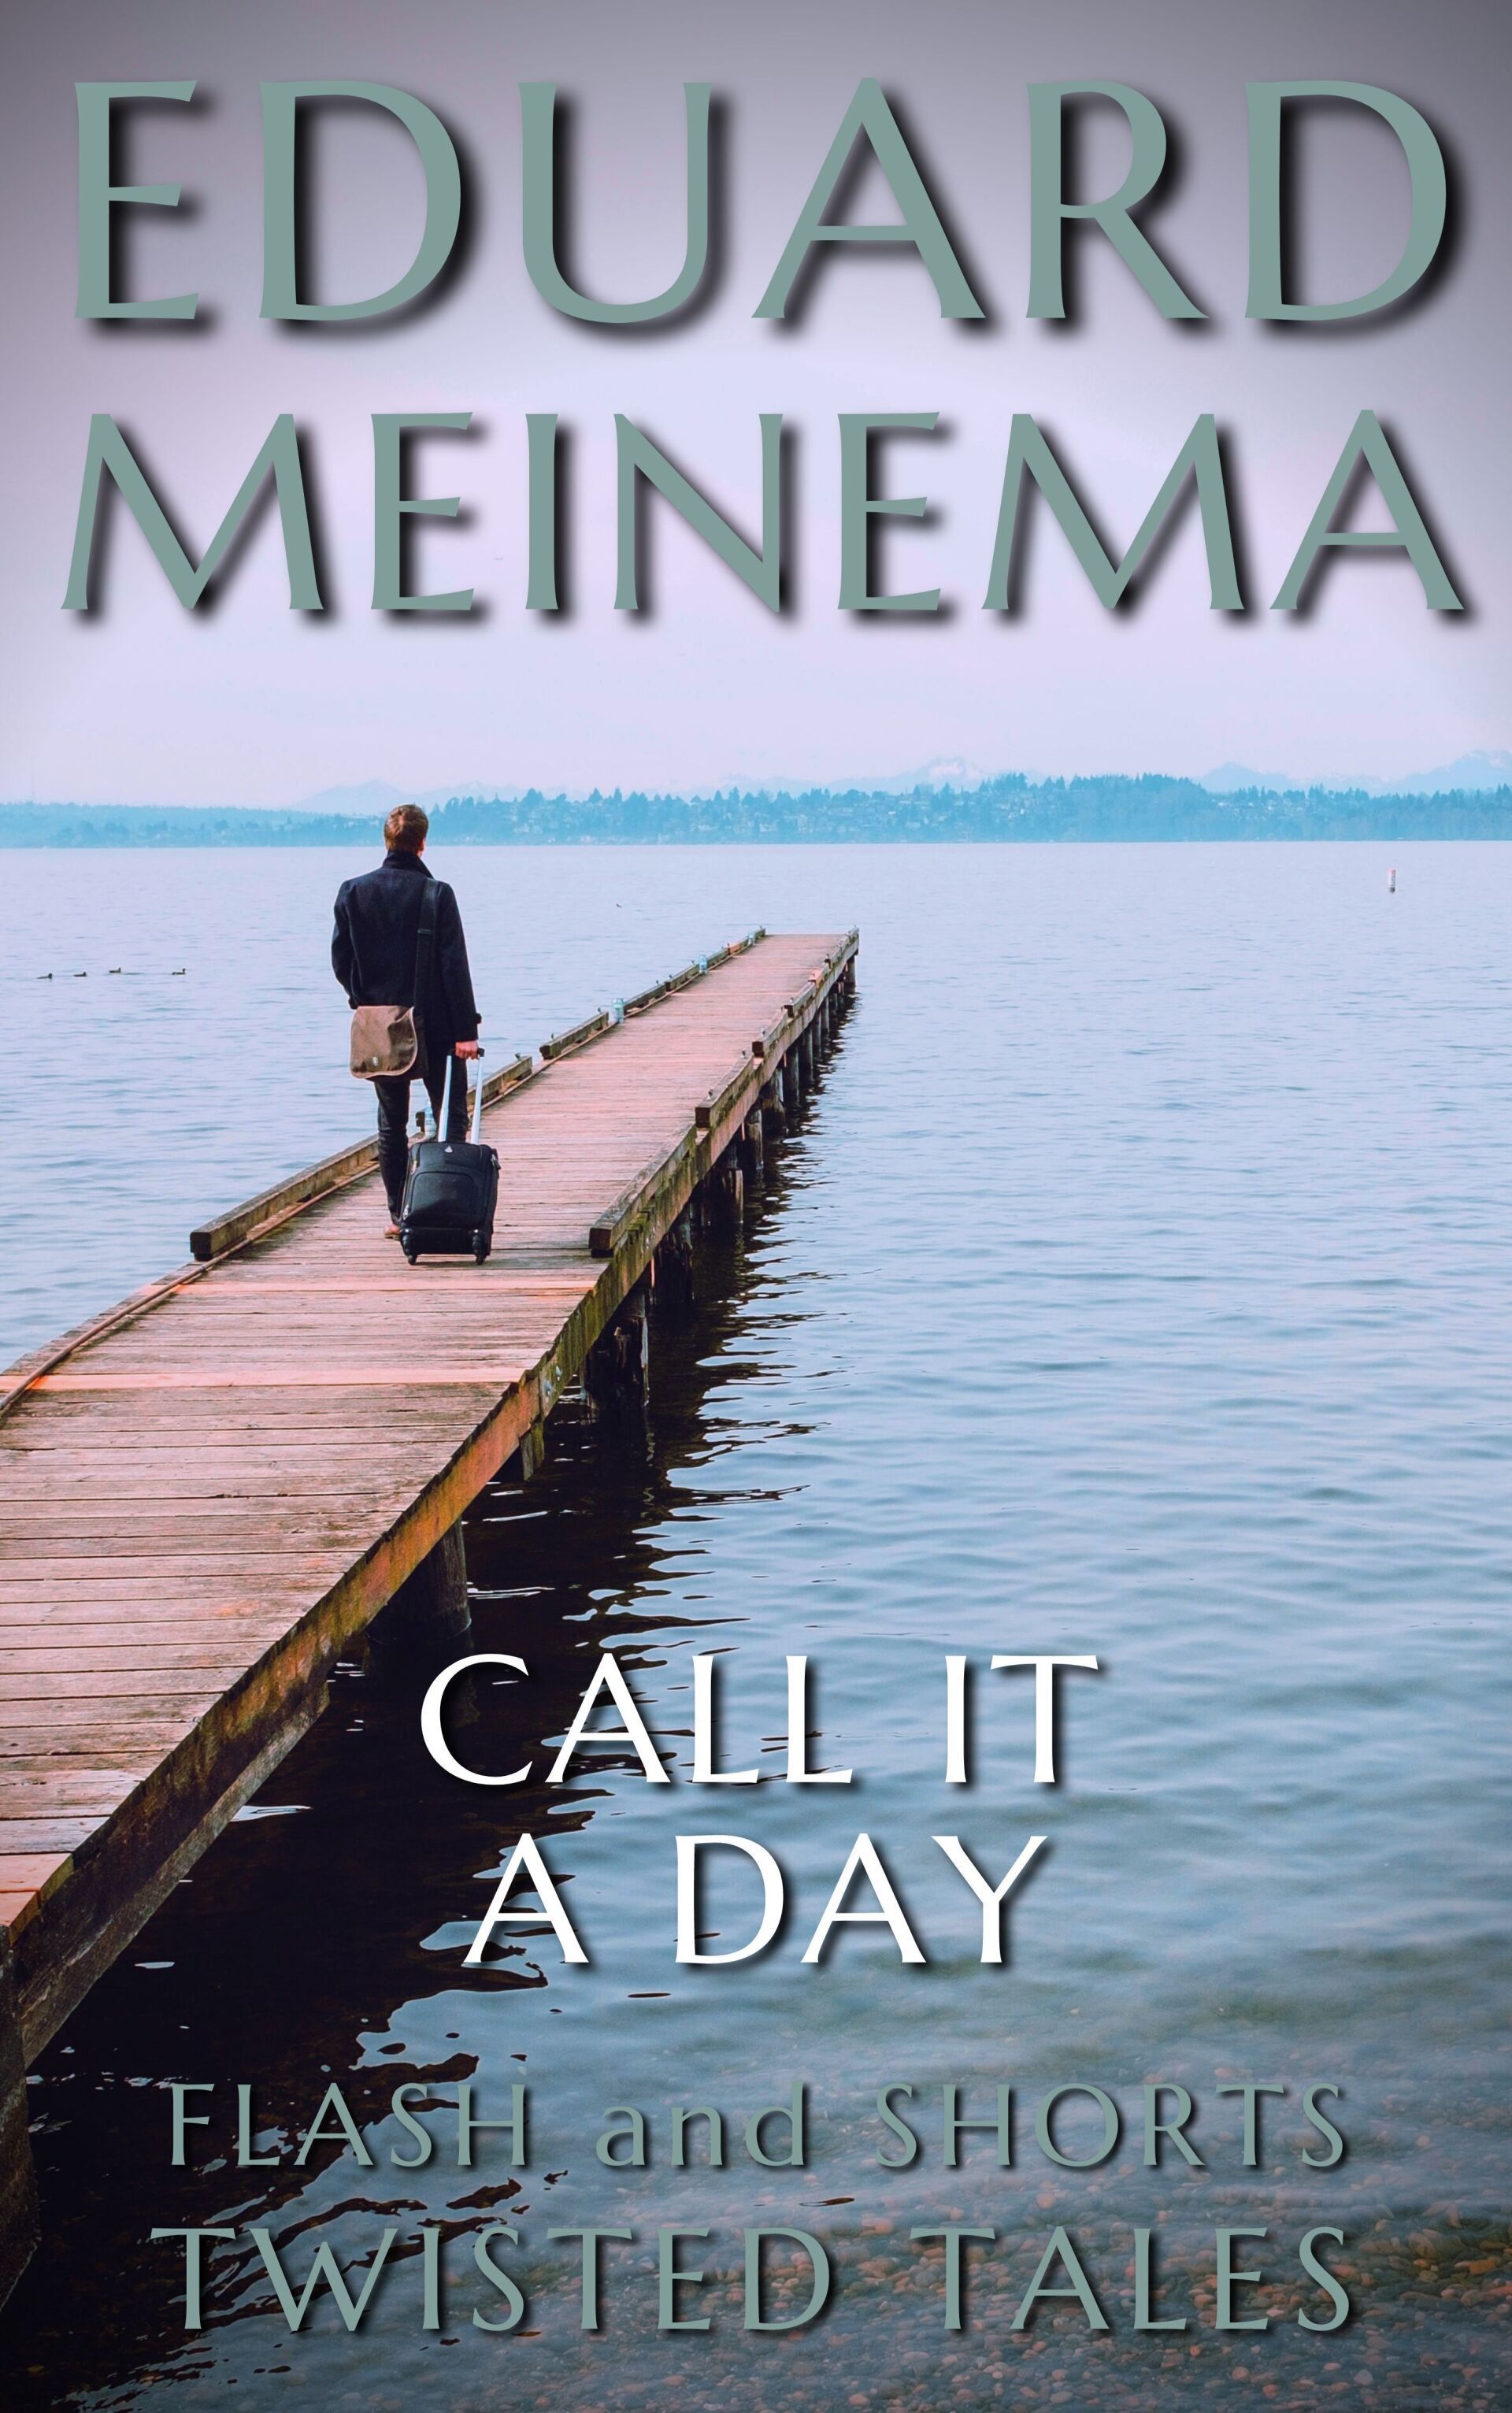 Call it a Day, short story by Eduard Meinema.